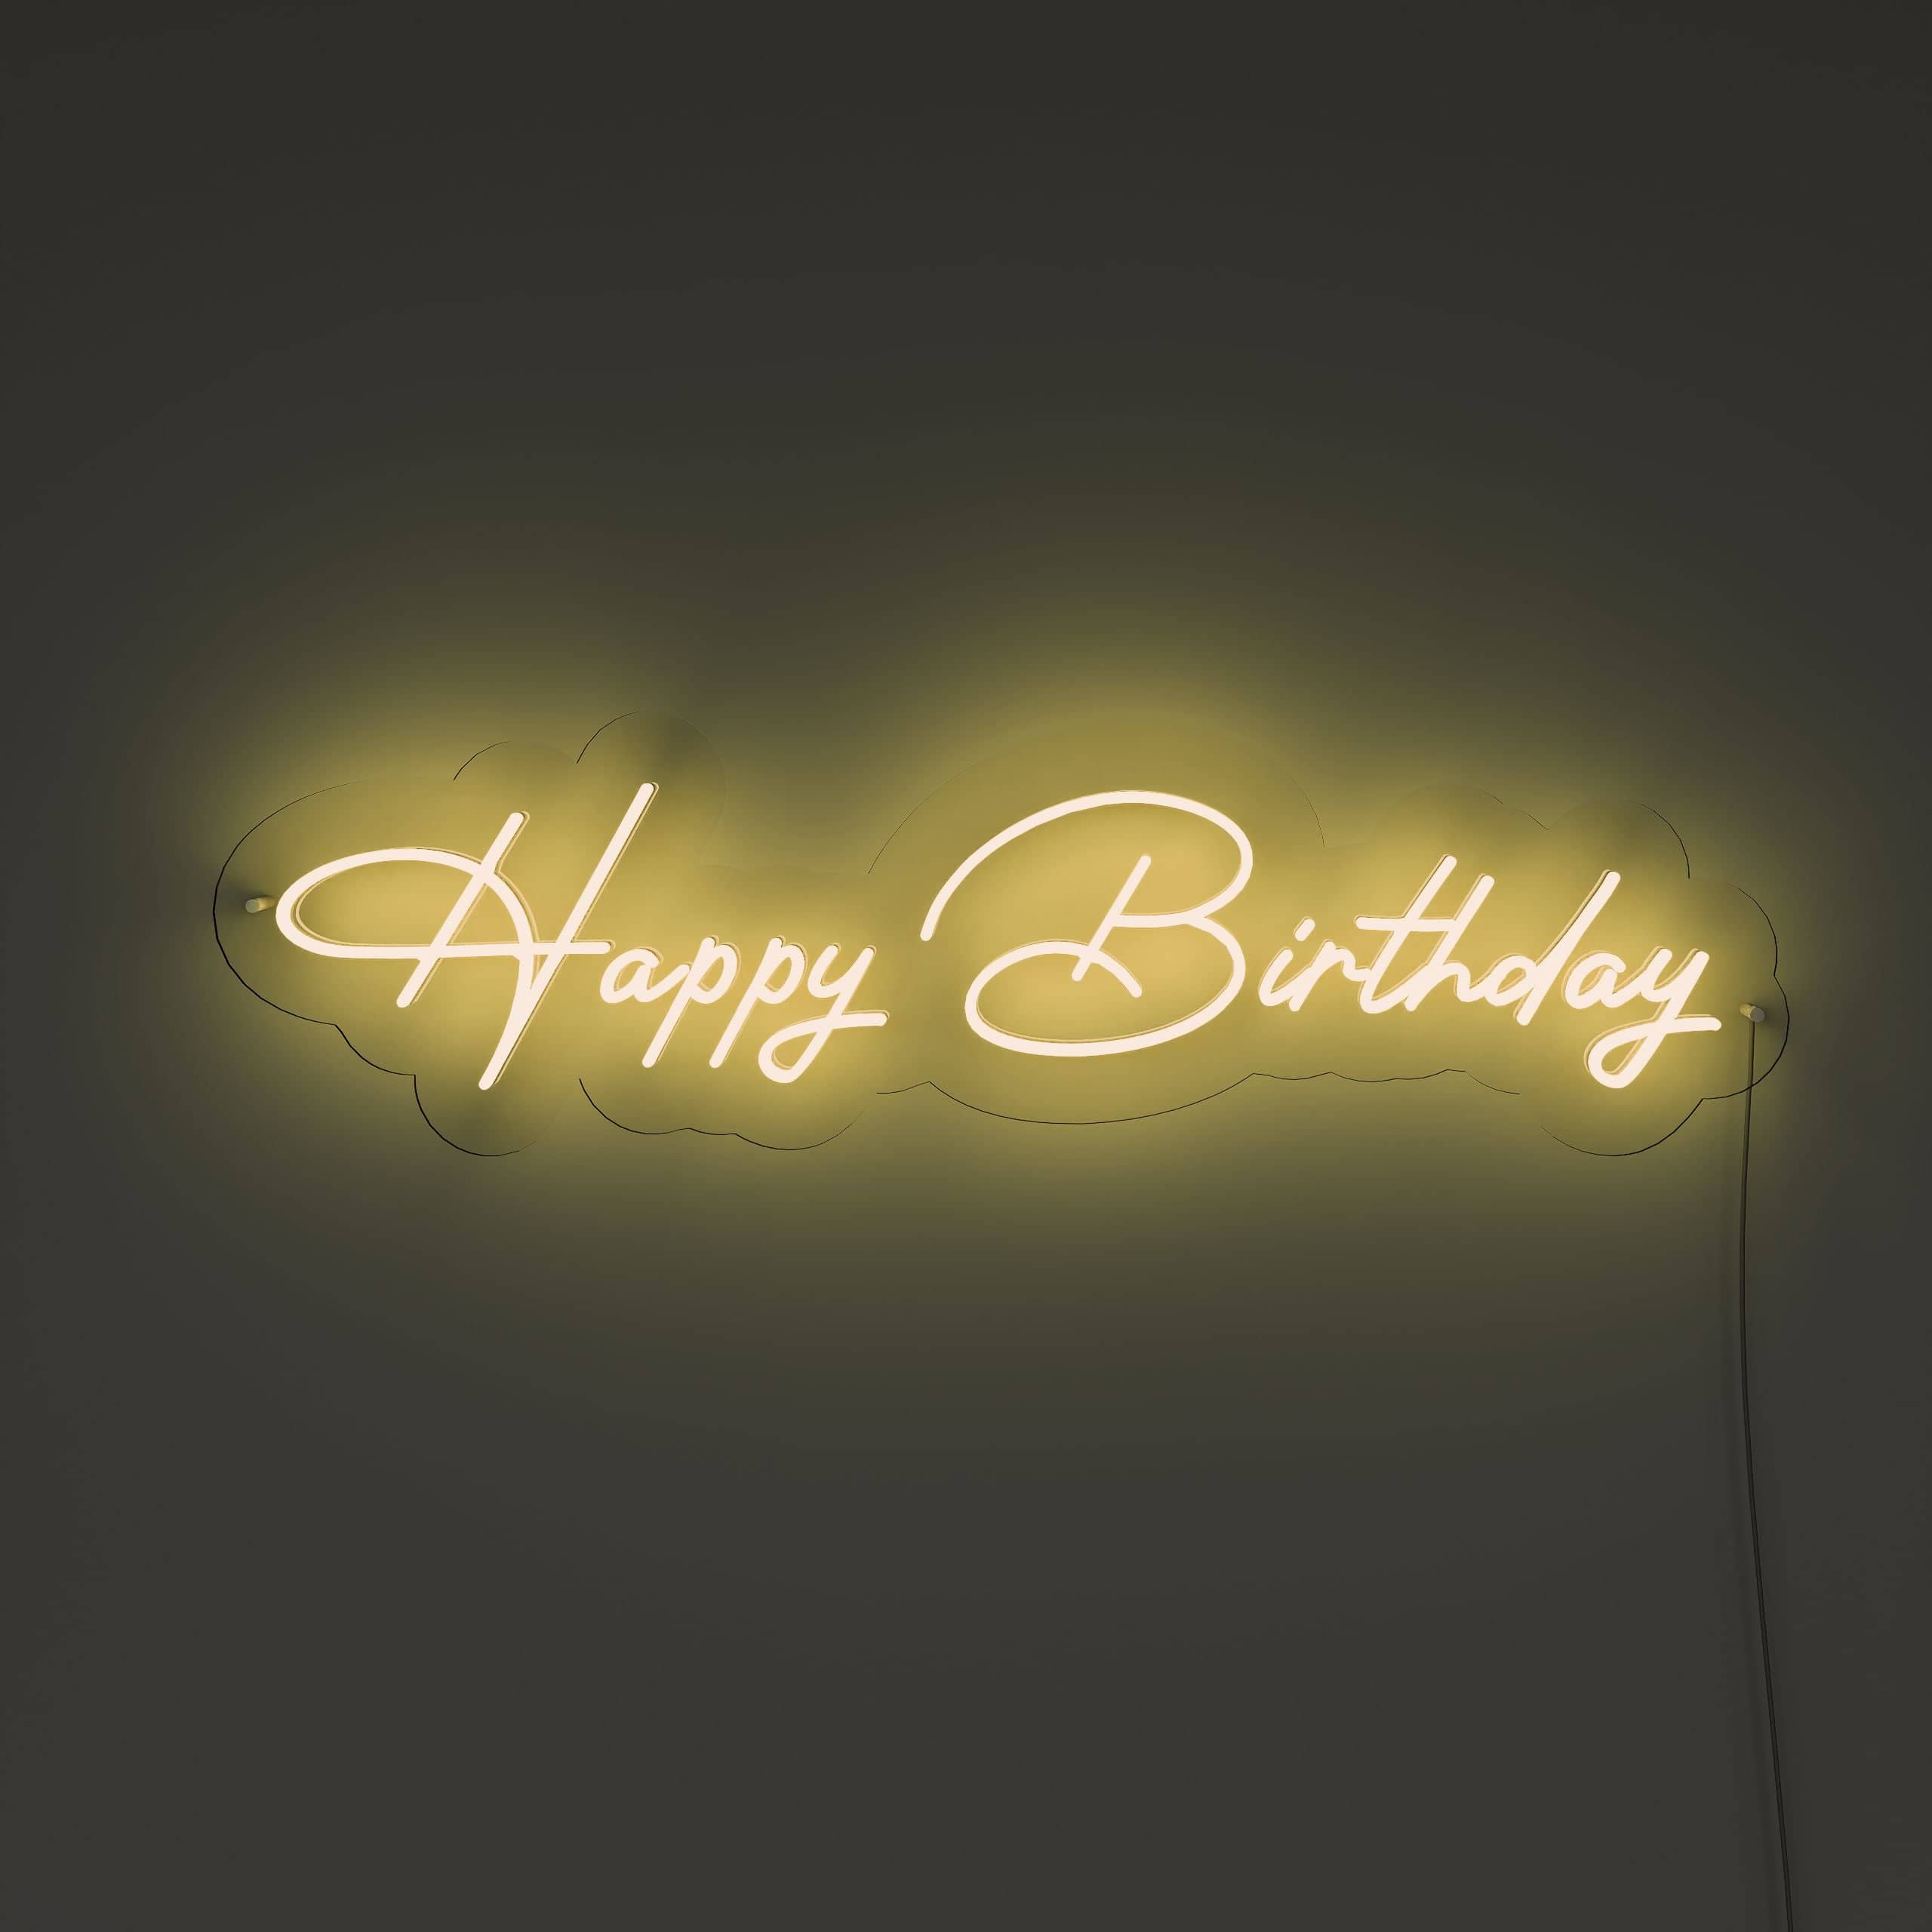 enjoy-your-special-day-to-the-fullest!-neon-sign-lite